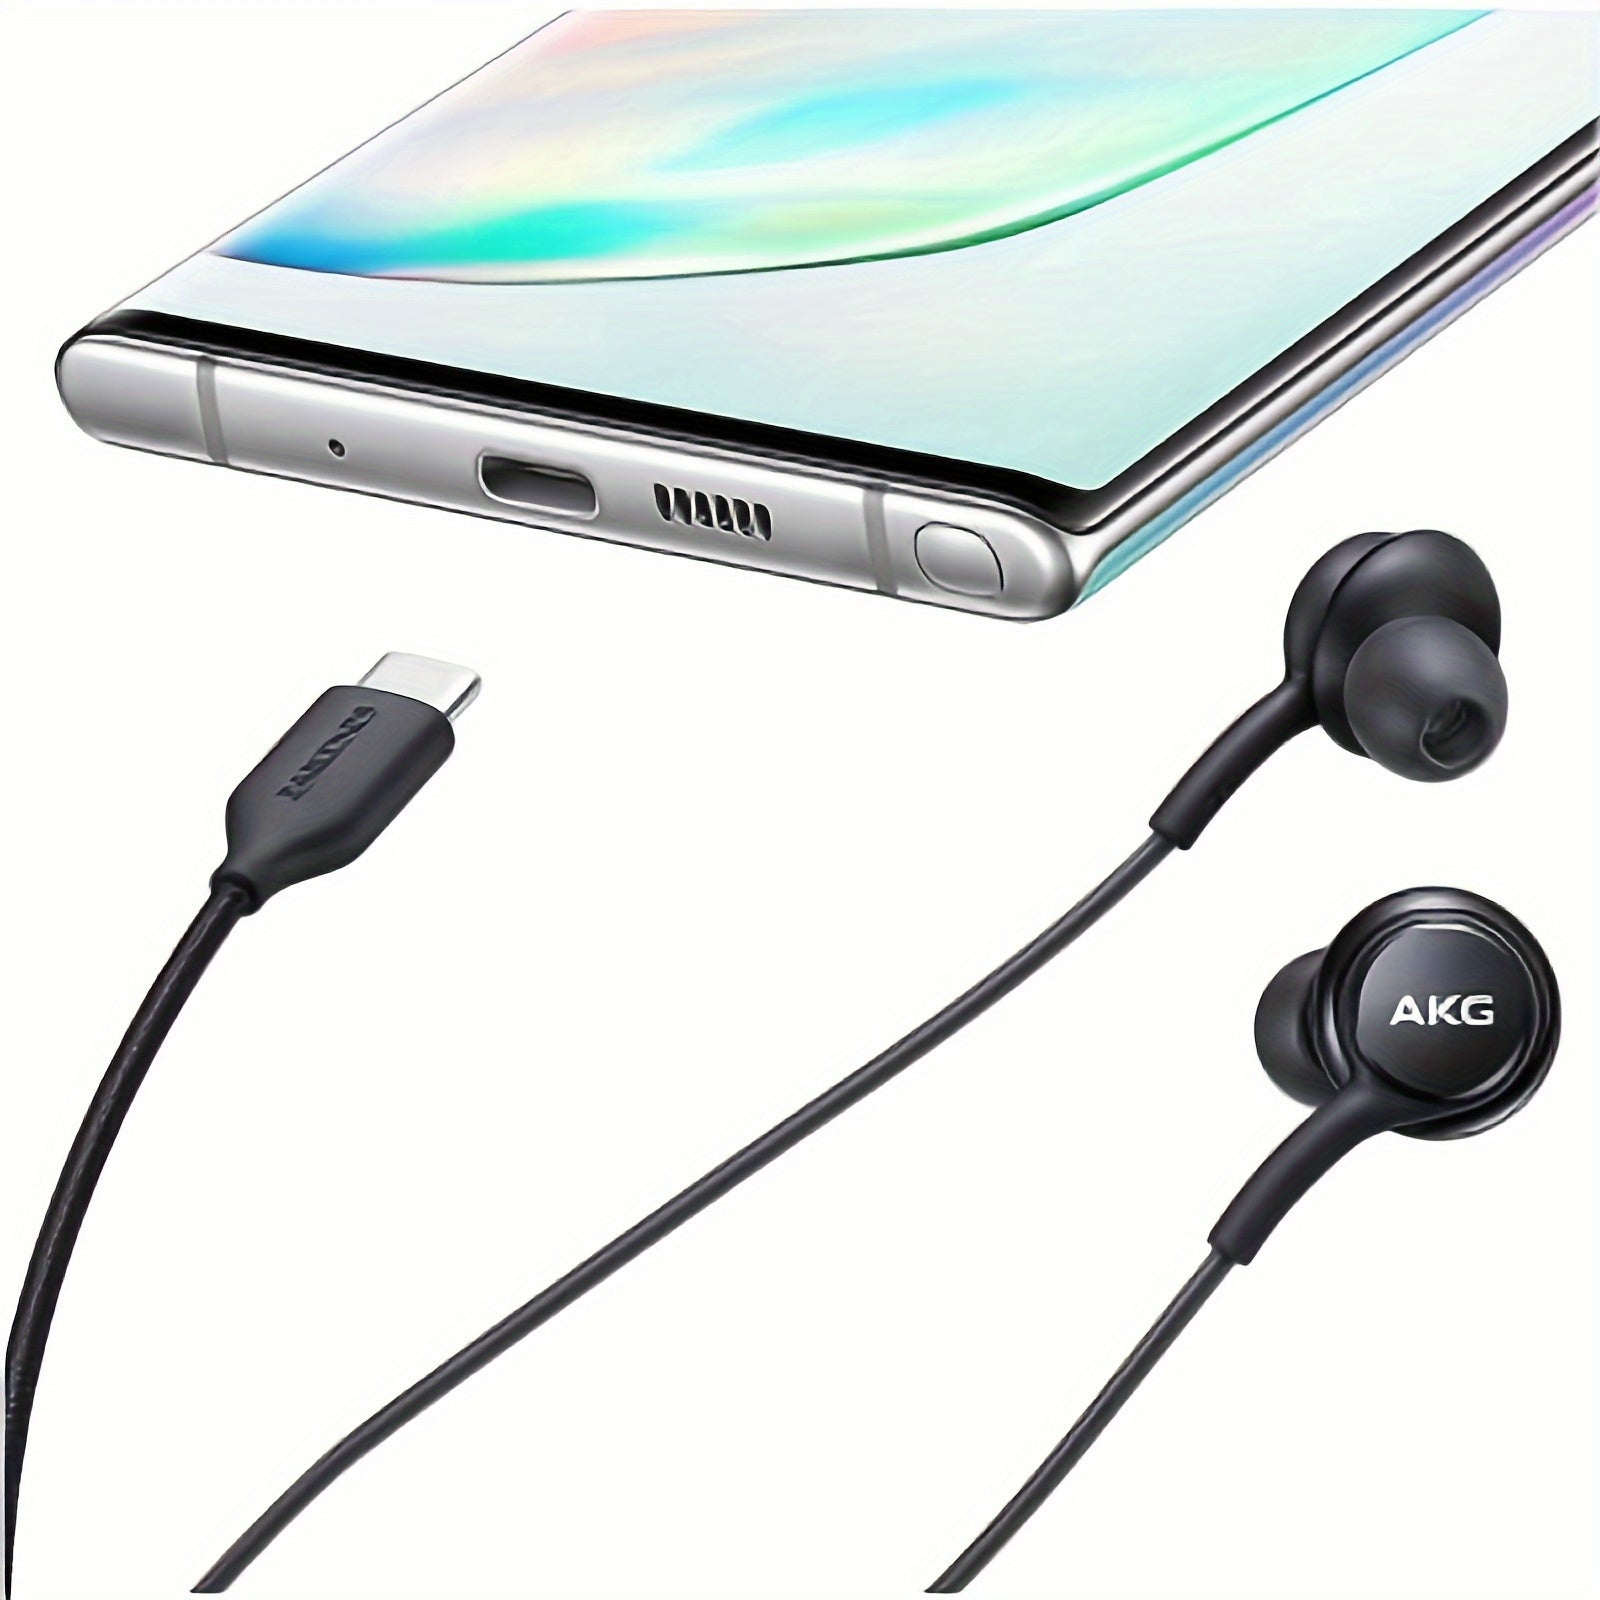 AKG Stereo Headphones For Samsung Galaxy S23 Ultra, Galaxy S22 Ultra, S21 Ultra, S20 Ultra & Note 10+ - Designed By AKG - With Microphone And Volume Remote Control